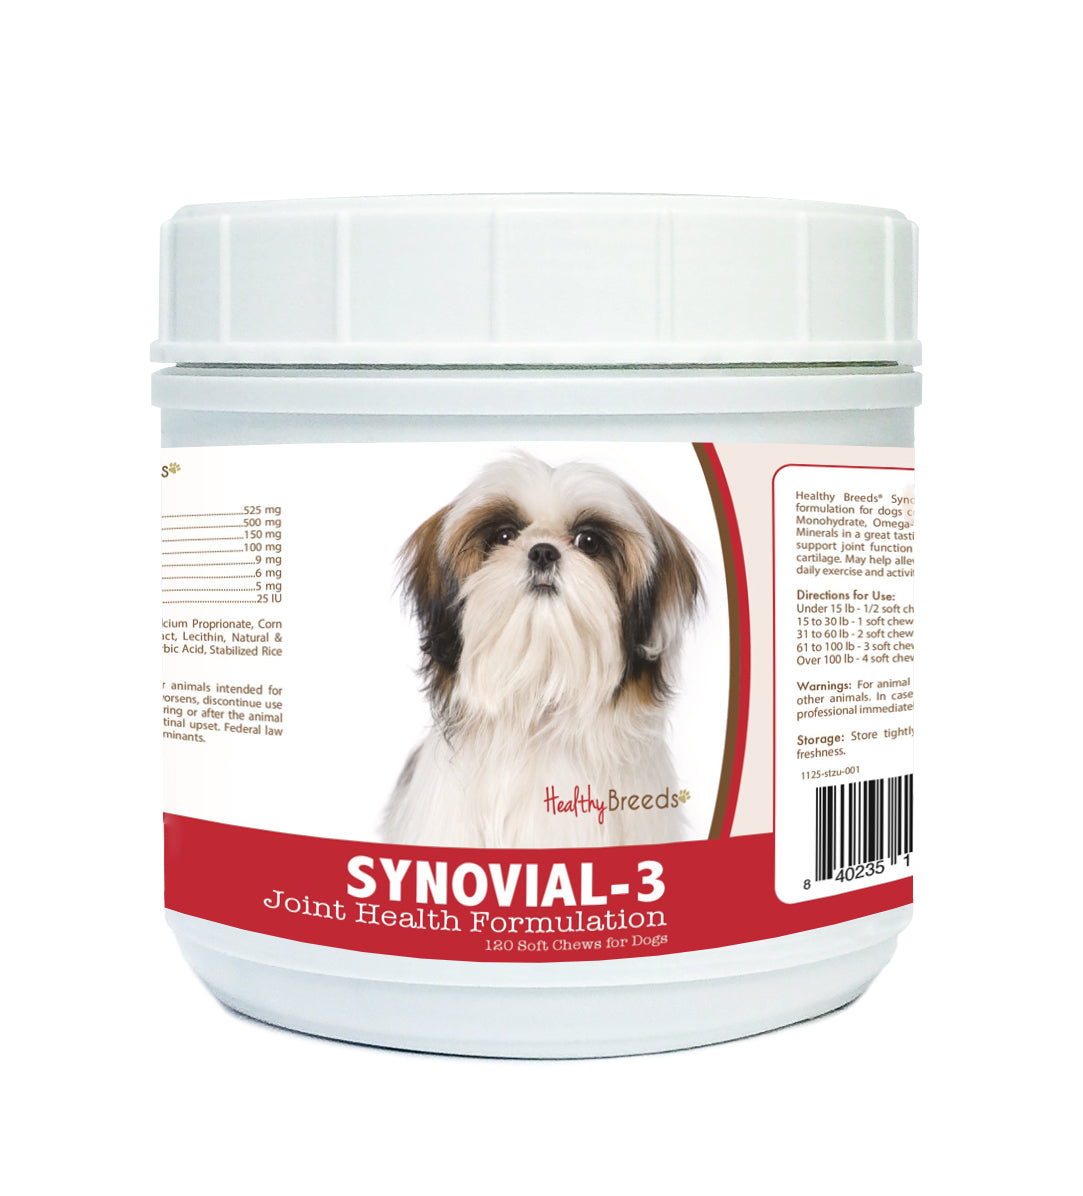 Shih Tzu Synovial-3 Joint Health Formulation Soft Chews 120 Count